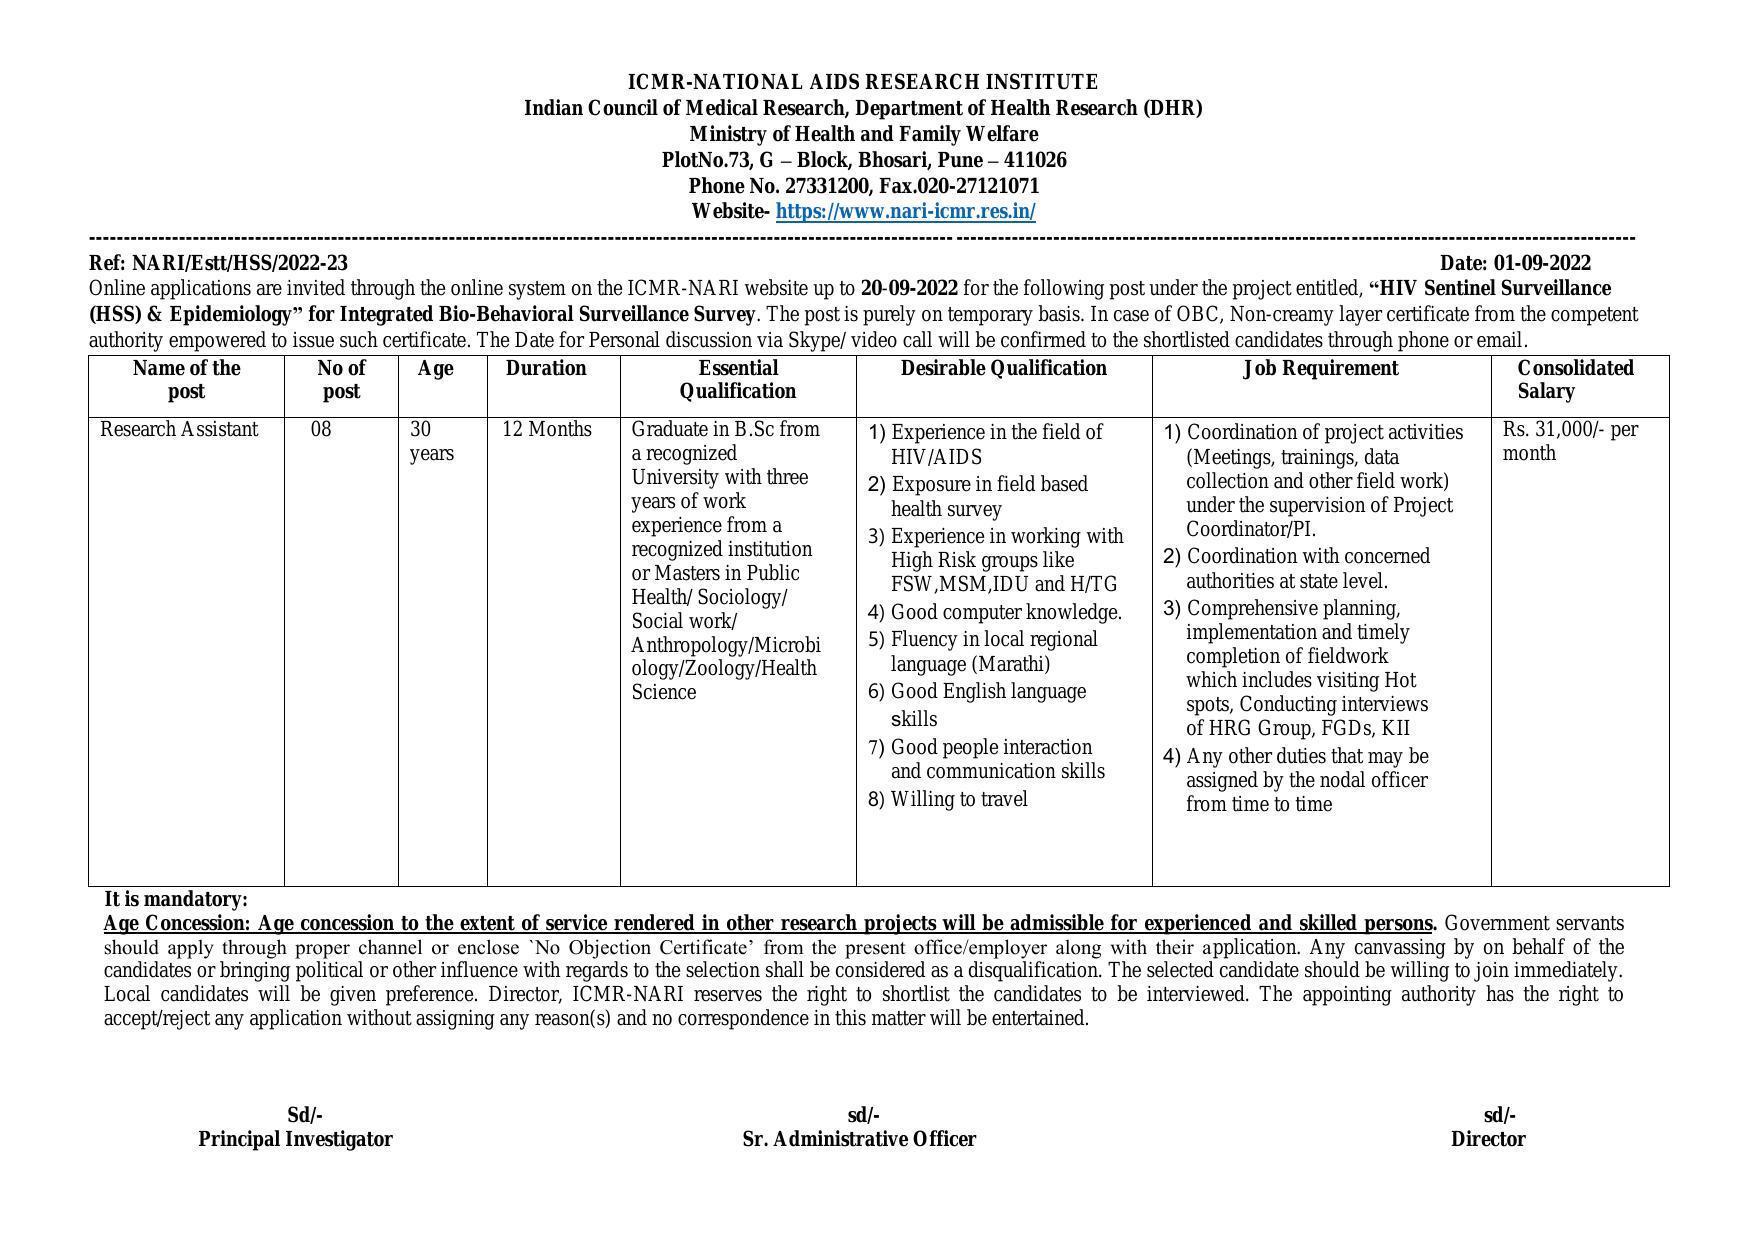 National AIDS Research Institute Invites Application for 8 Research Assistant Recruitment 2022 - Page 1